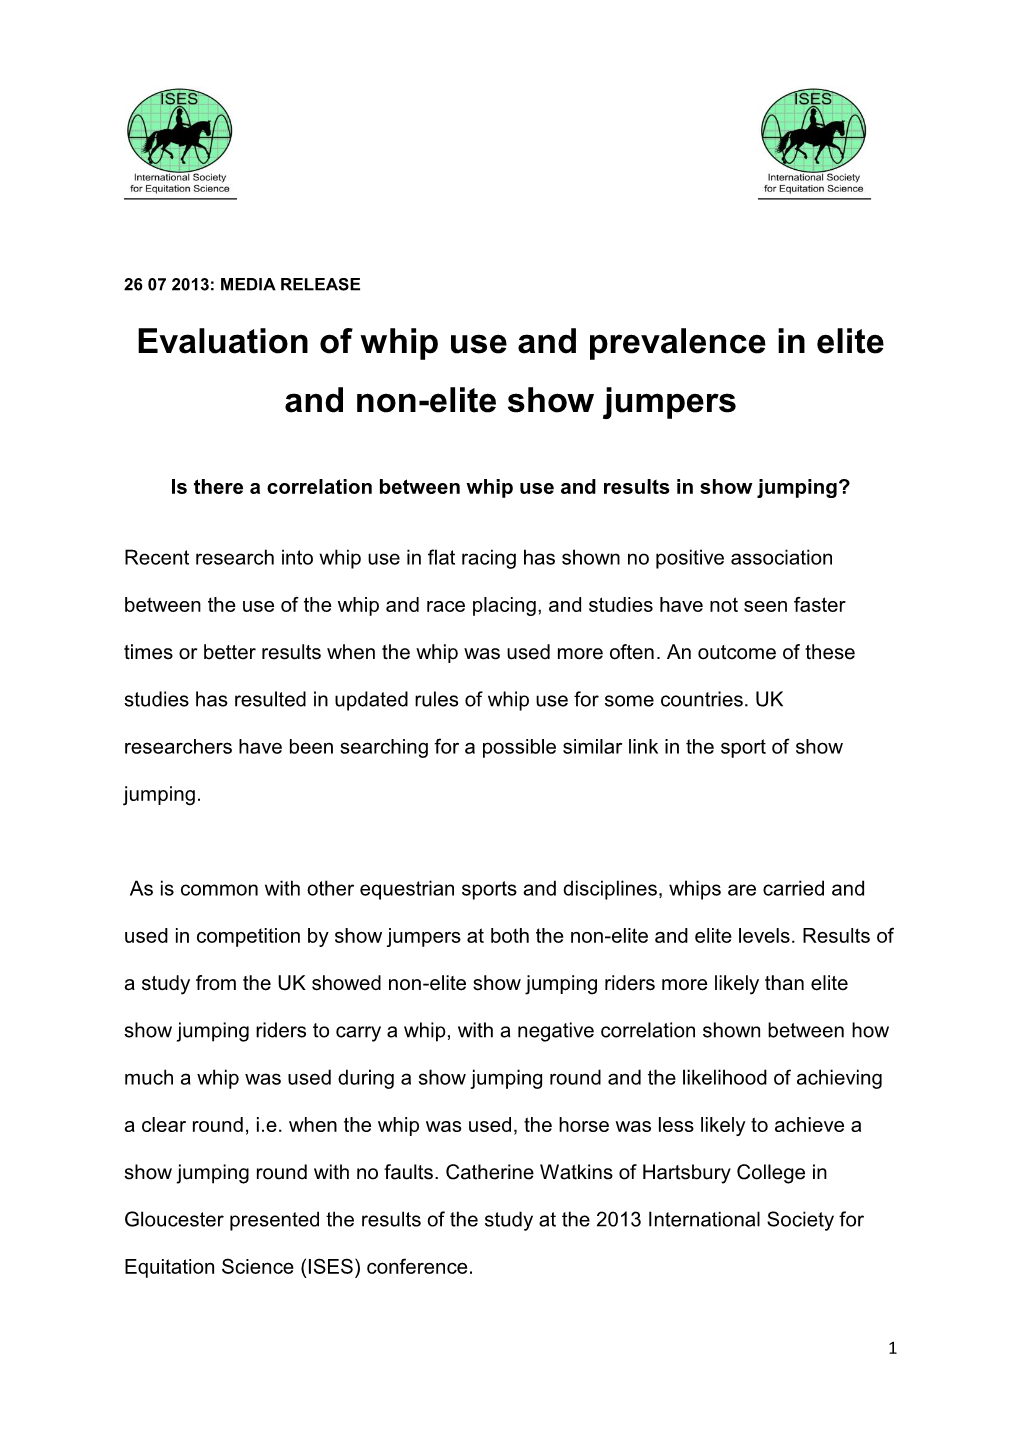 Evaluation of Whip Use and Prevalence in Elite and Non-Elite Show Jumpers